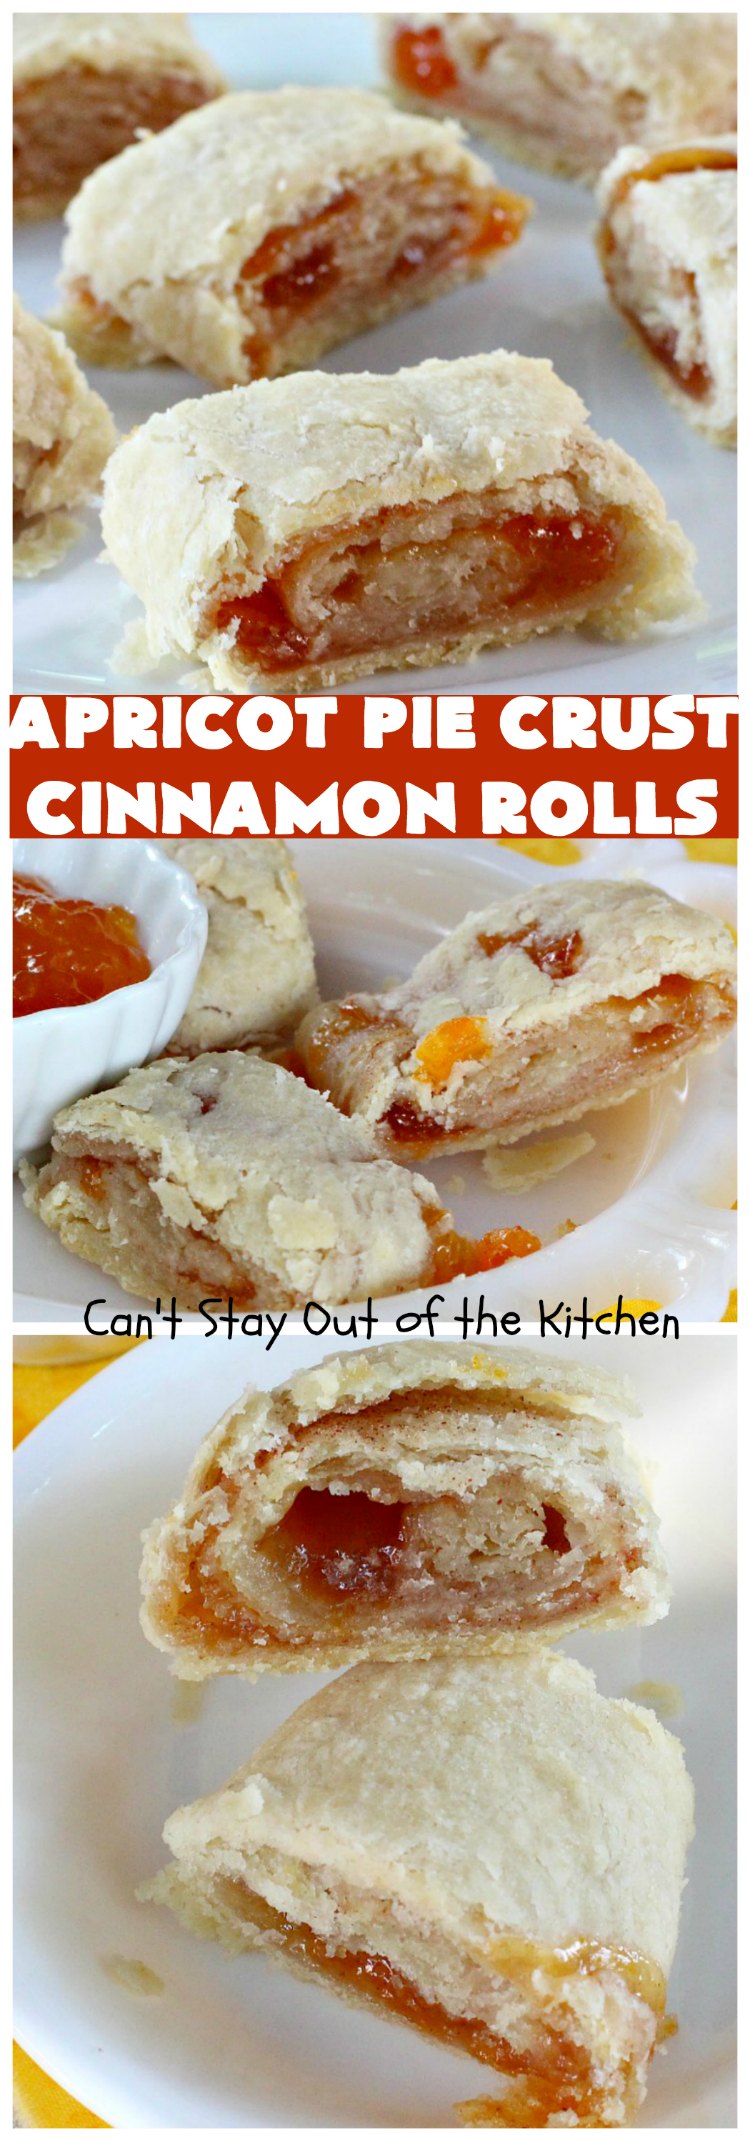 Apricot Pie Crust Cinnamon Rolls | Can't Stay Out of the Kitchen